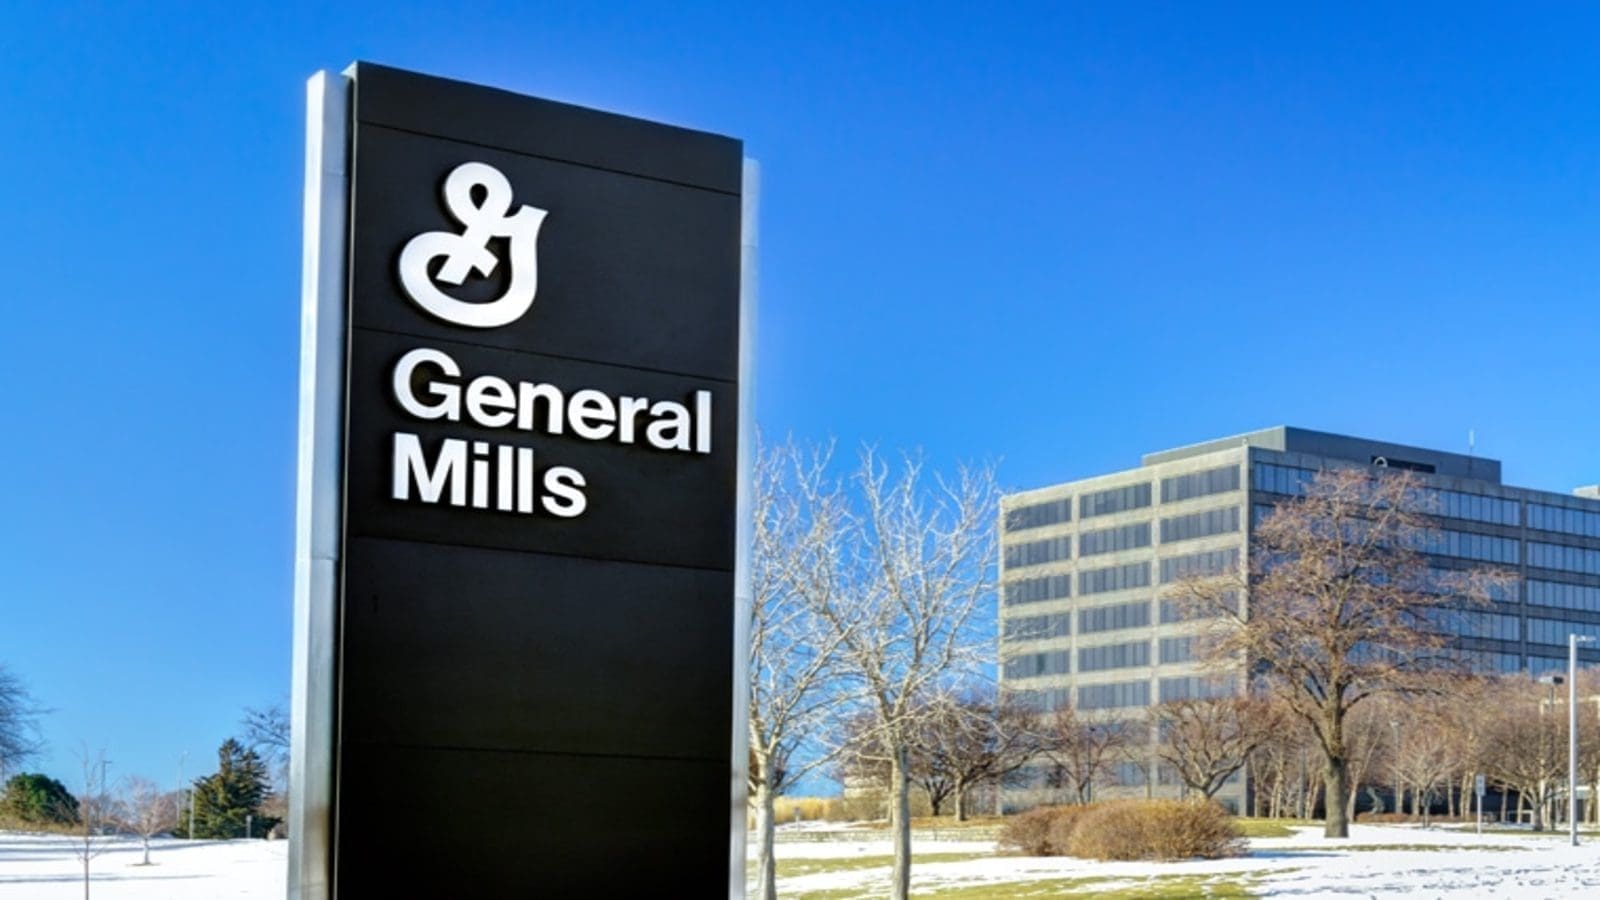 General Mills to acquire TNT Crust to expand away-from-home presence